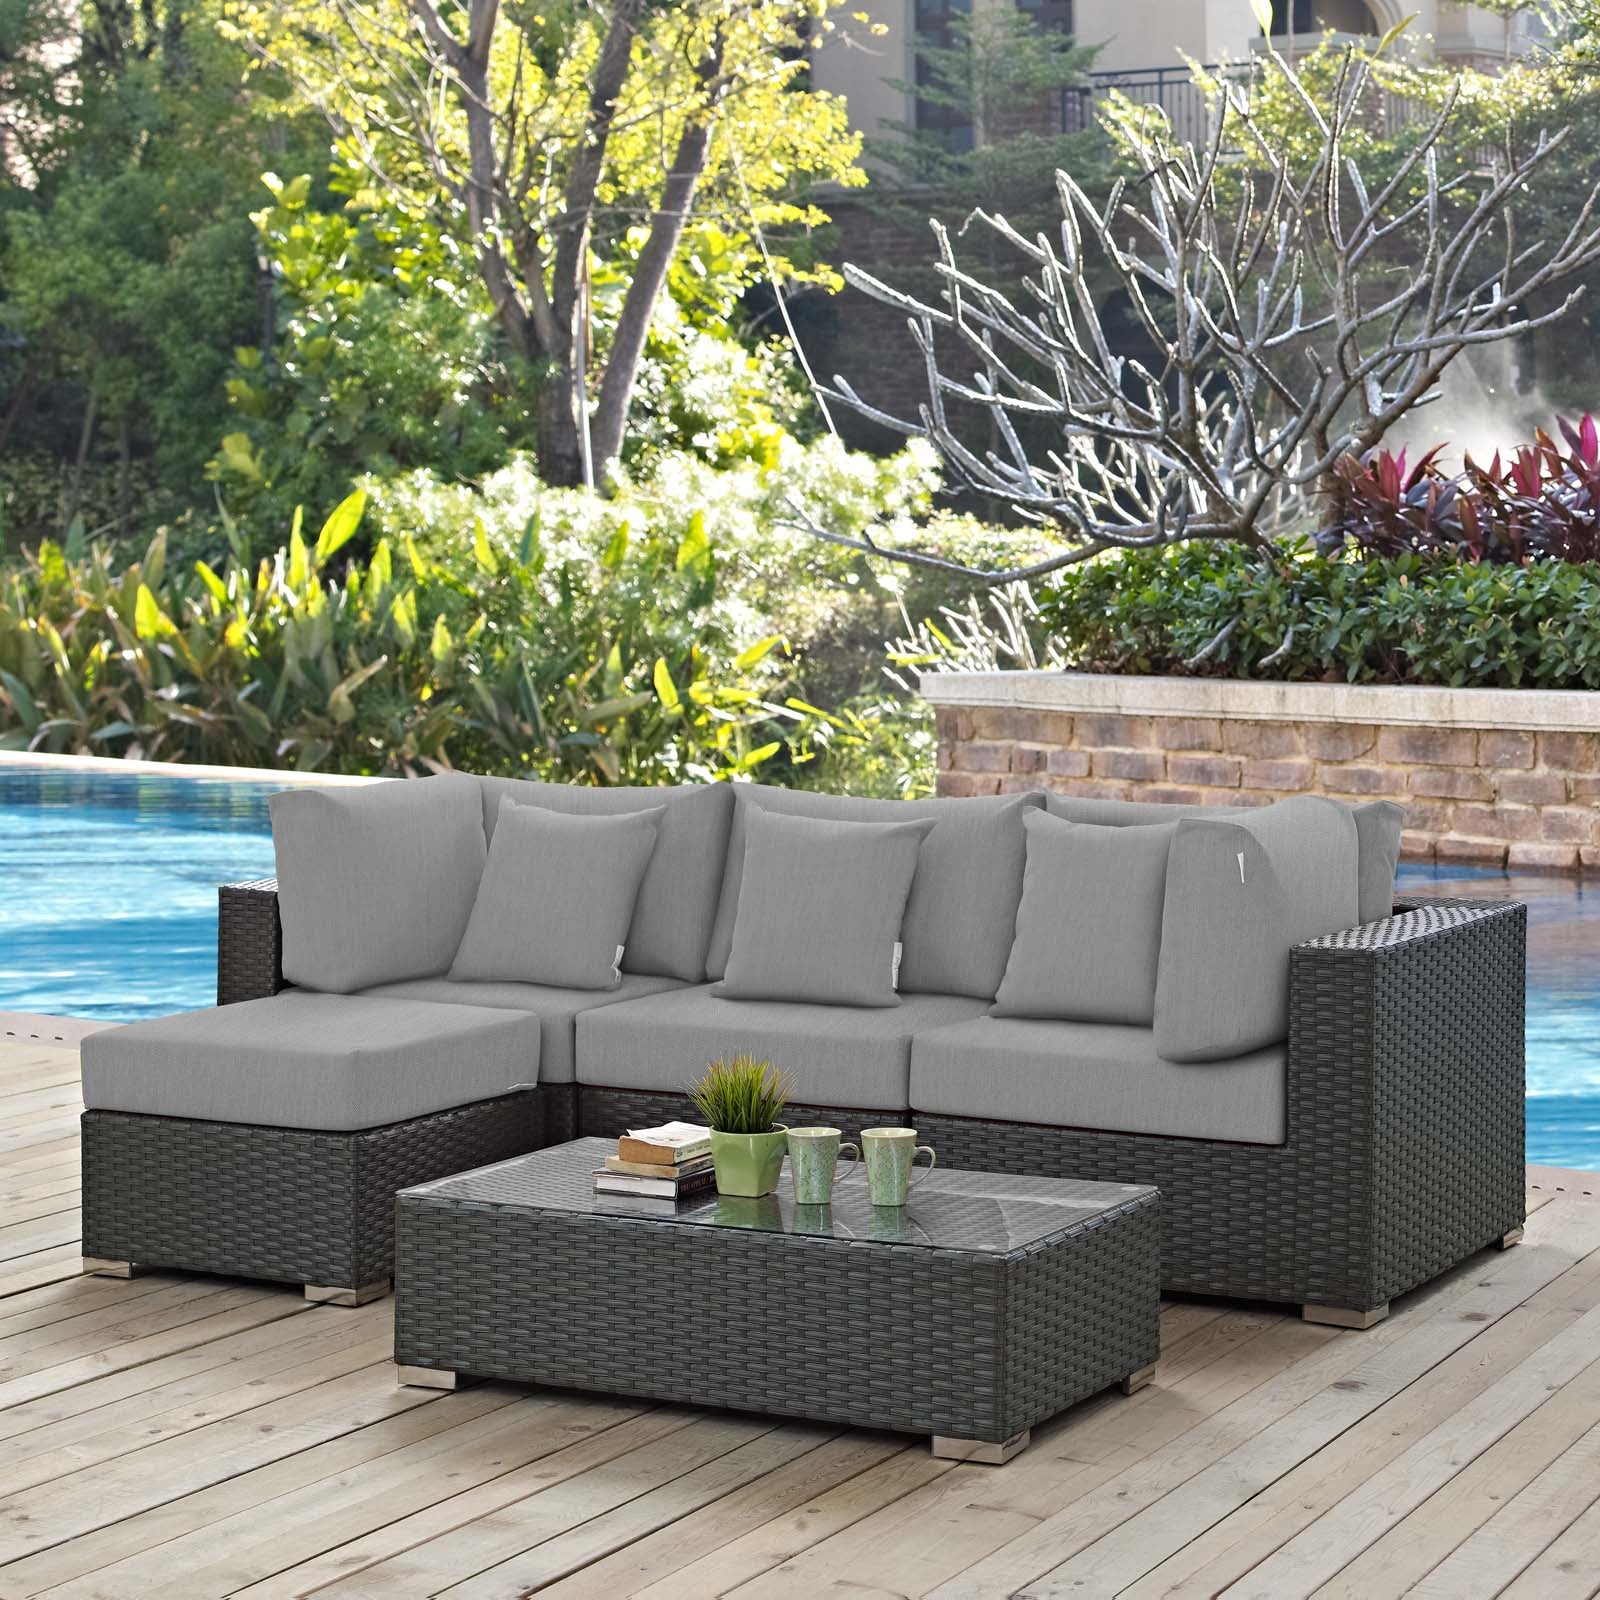 Modway Outdoor Conversation Sets - Sojourn 5 Piece Outdoor Patio Sectional Set Gray